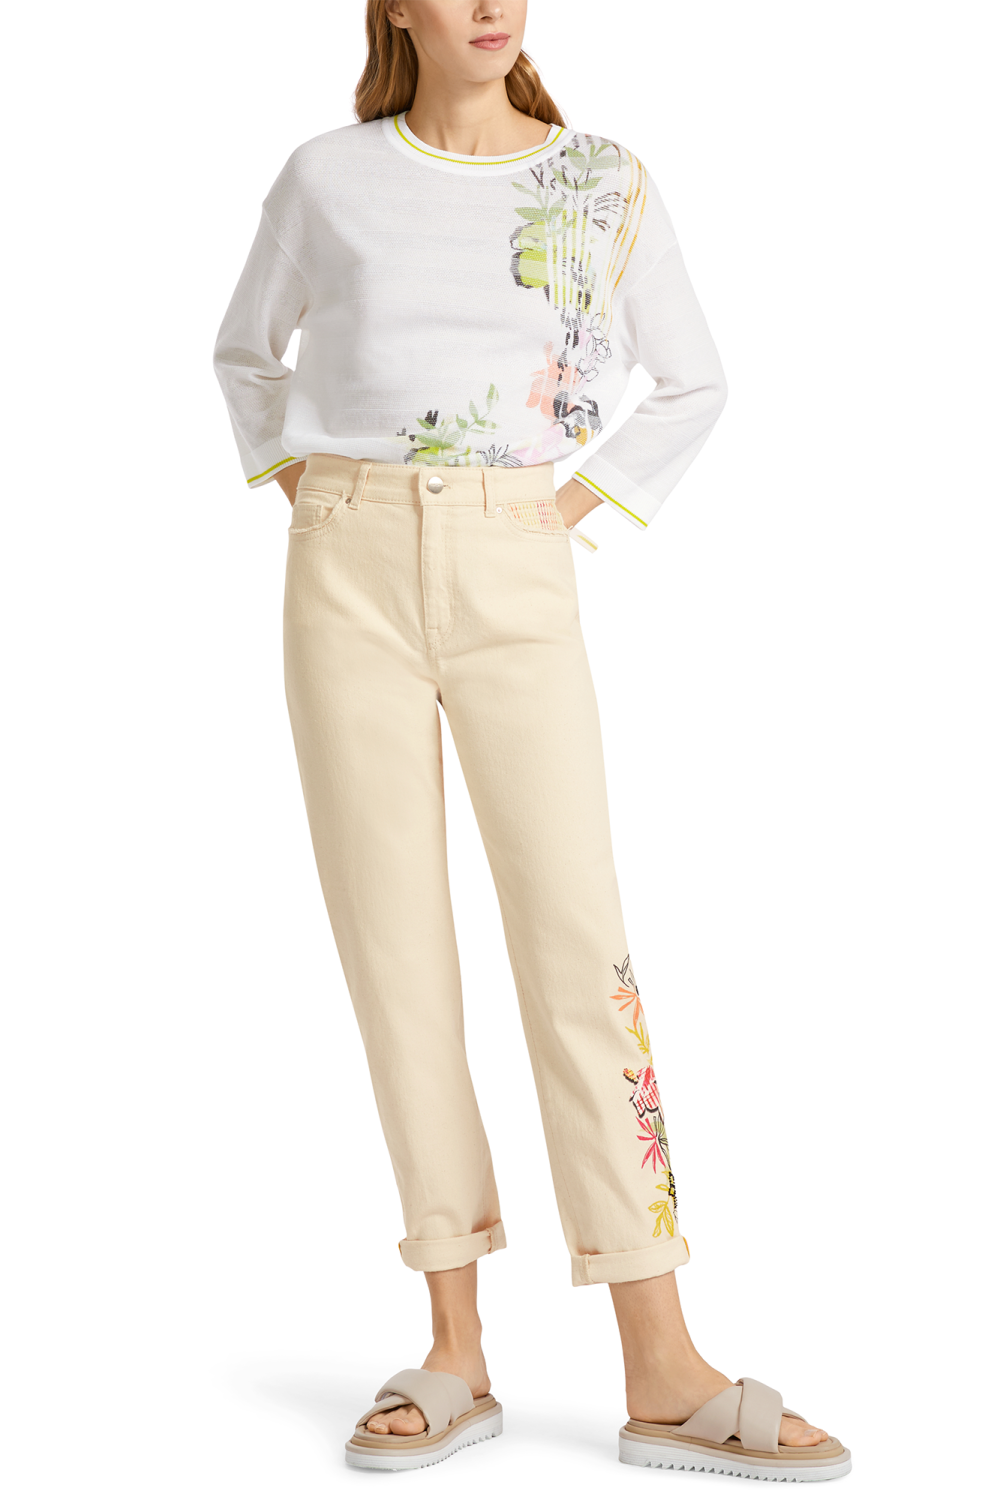 These Floral Side Bottom Jeans from Marc Cain are part of the sustainability label “Rethink Together”.